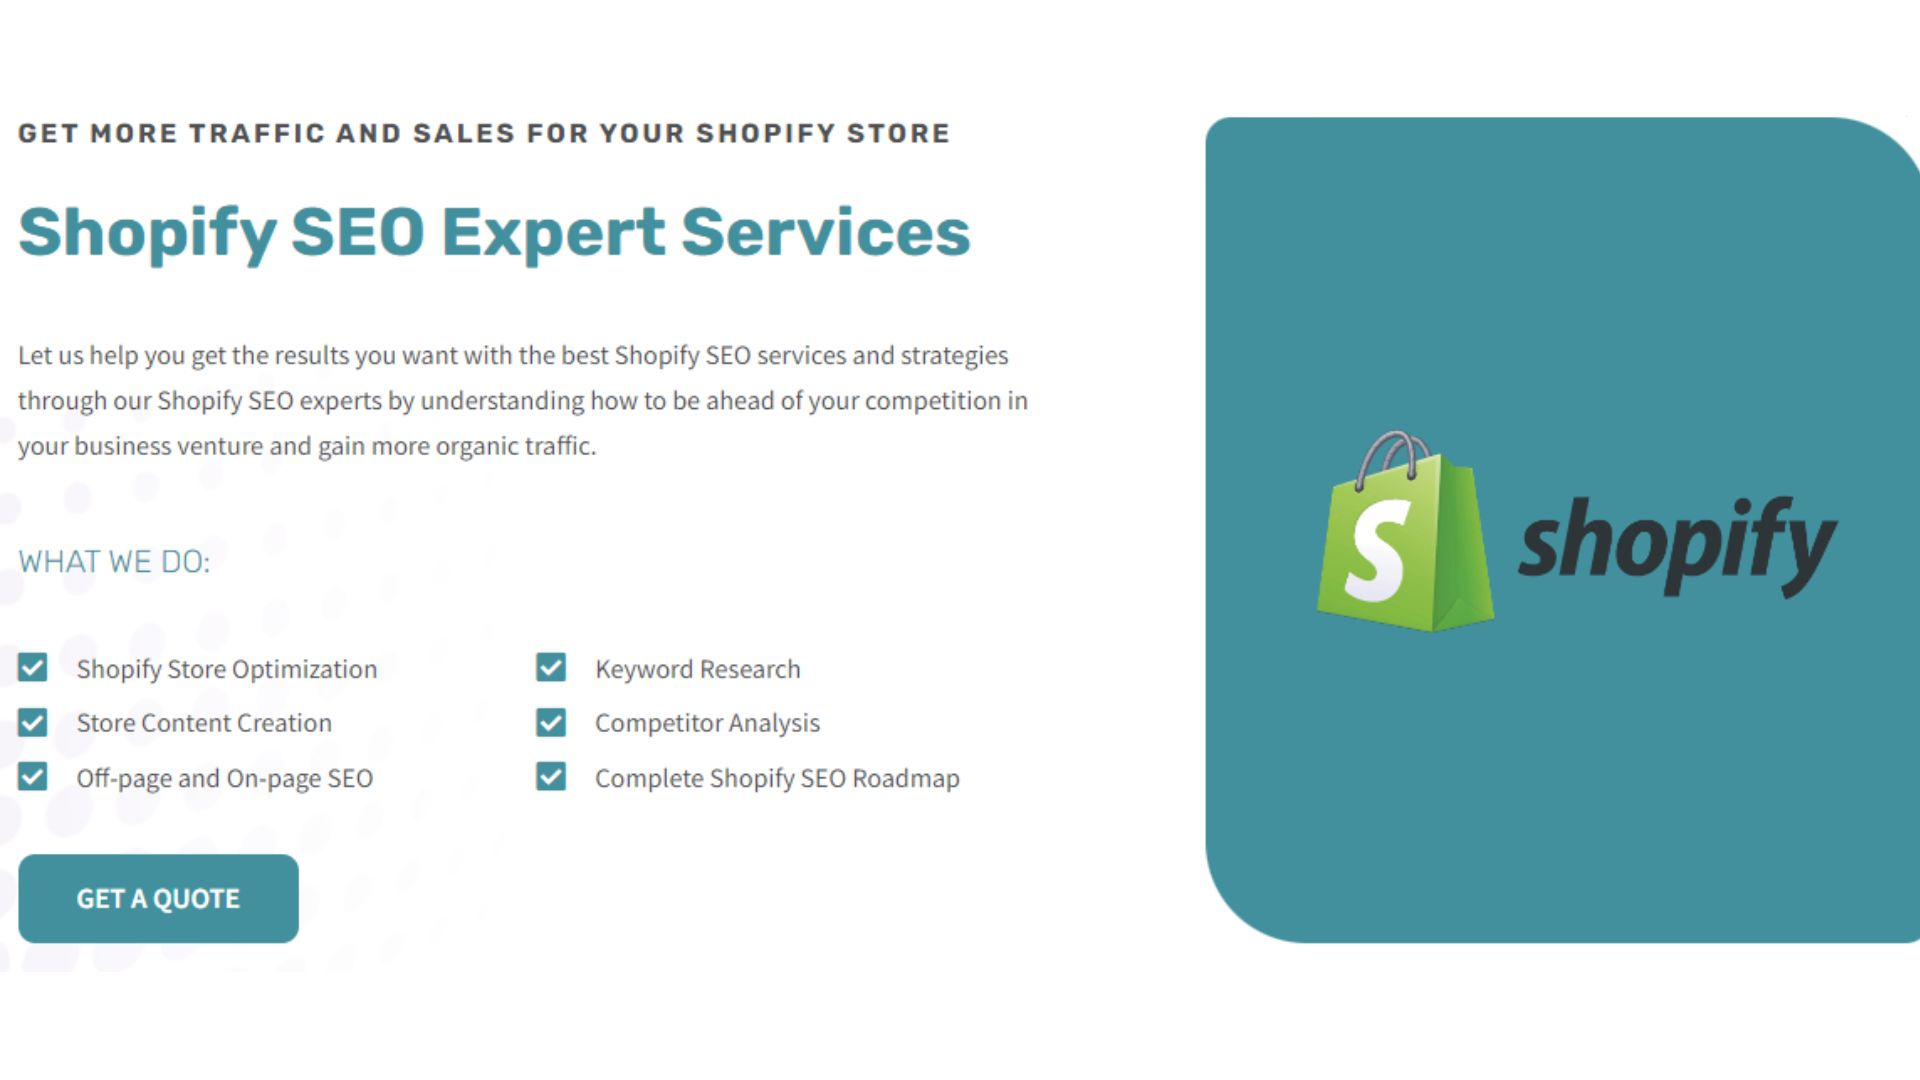 Shopify Seo Specialist What Is A Shopify Seo Specialist, And What Do They Do?